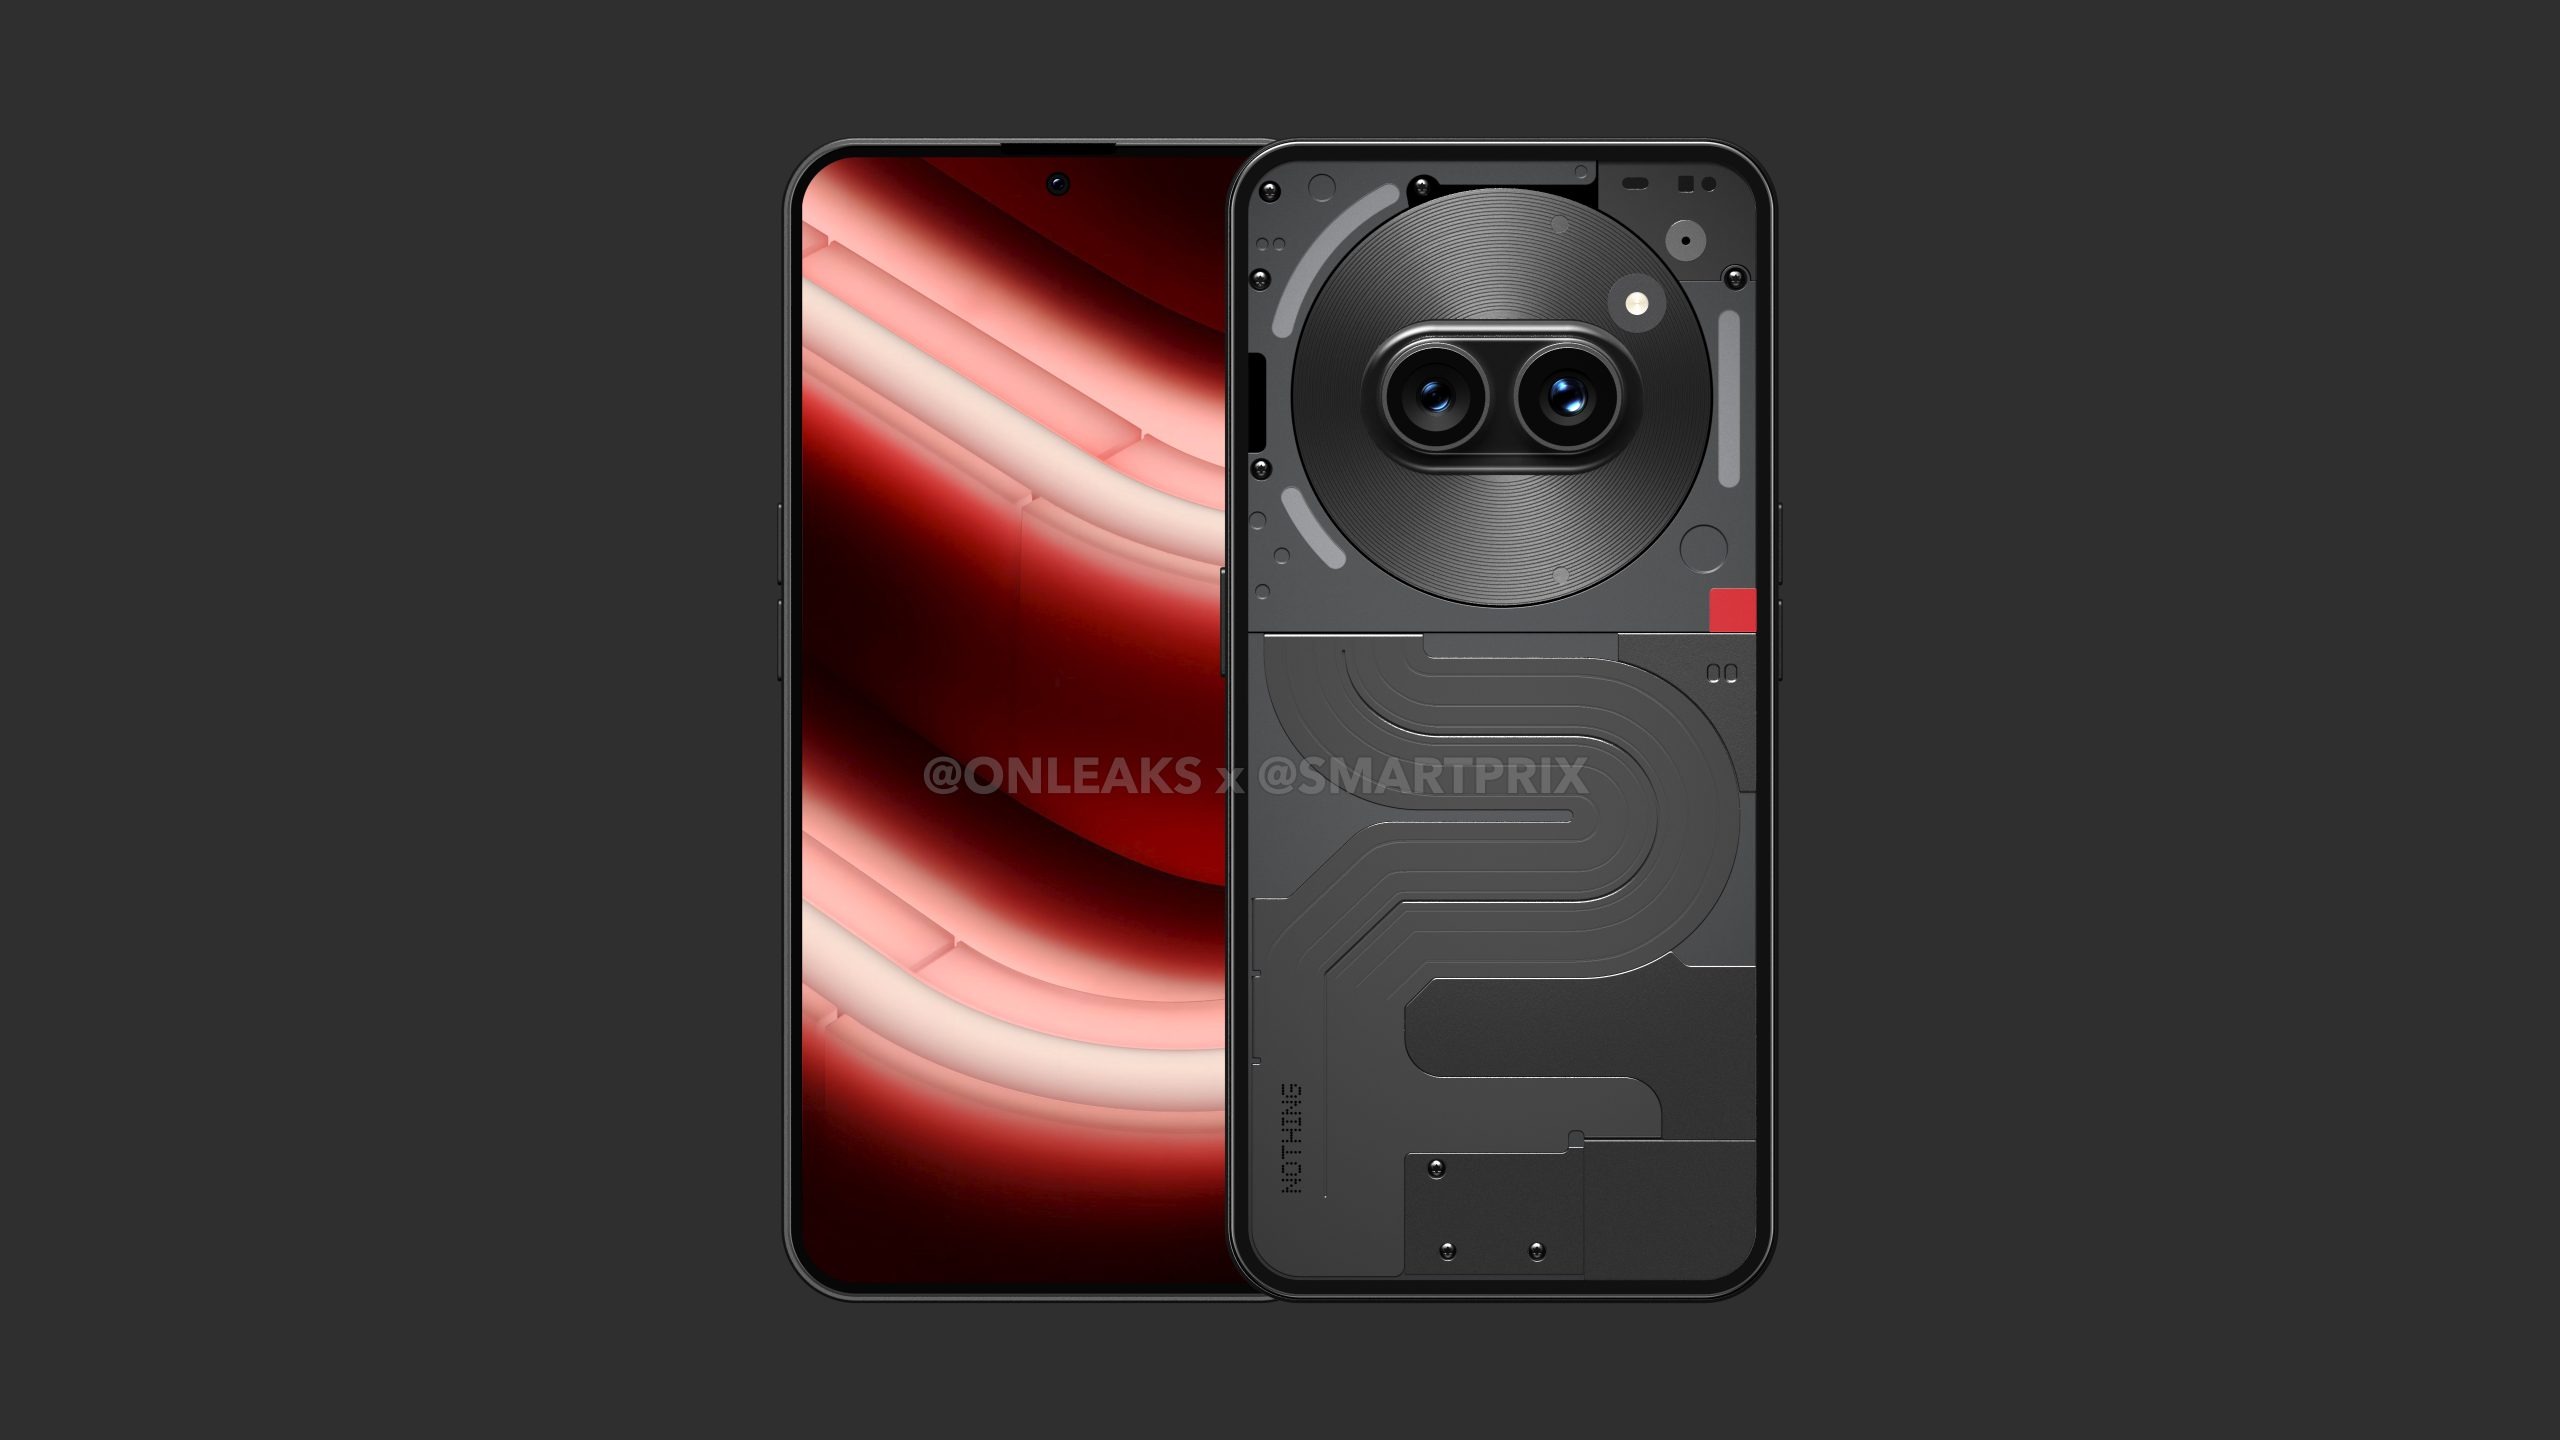 Alleged renders of the Nothing Phone 2a